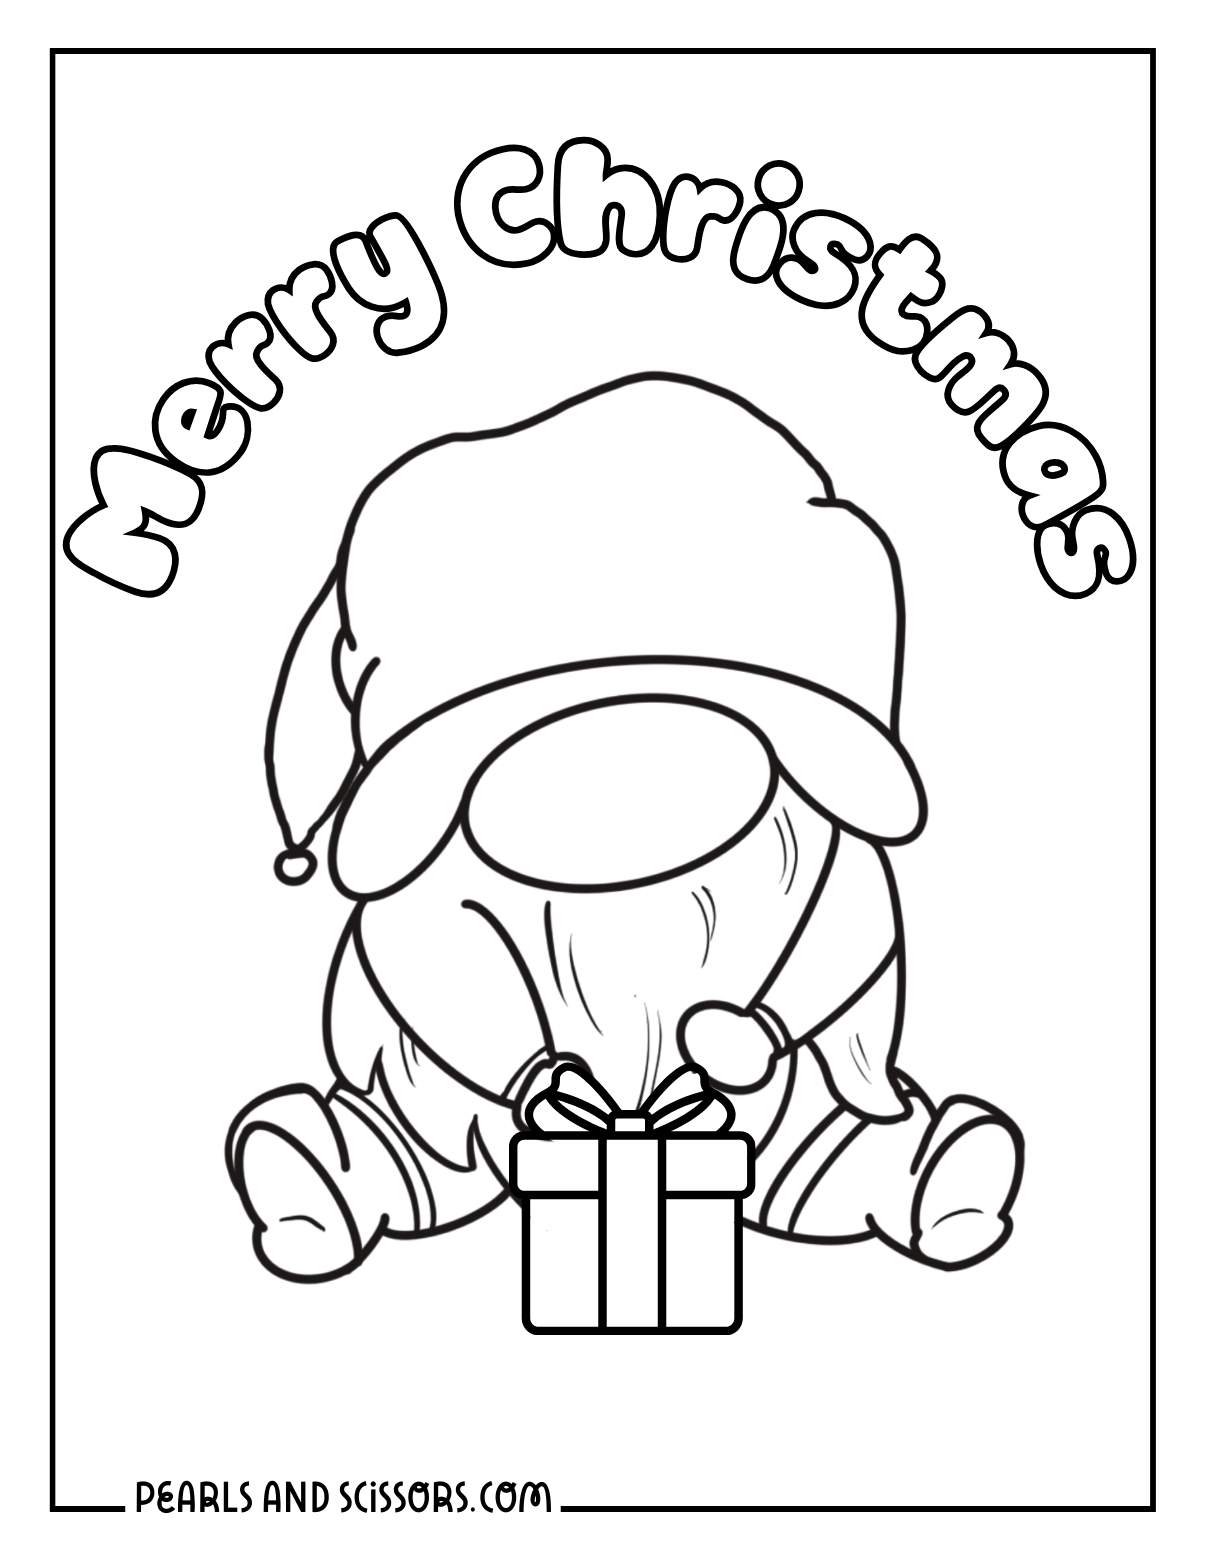 Cute xmas gnome character to color for kids.